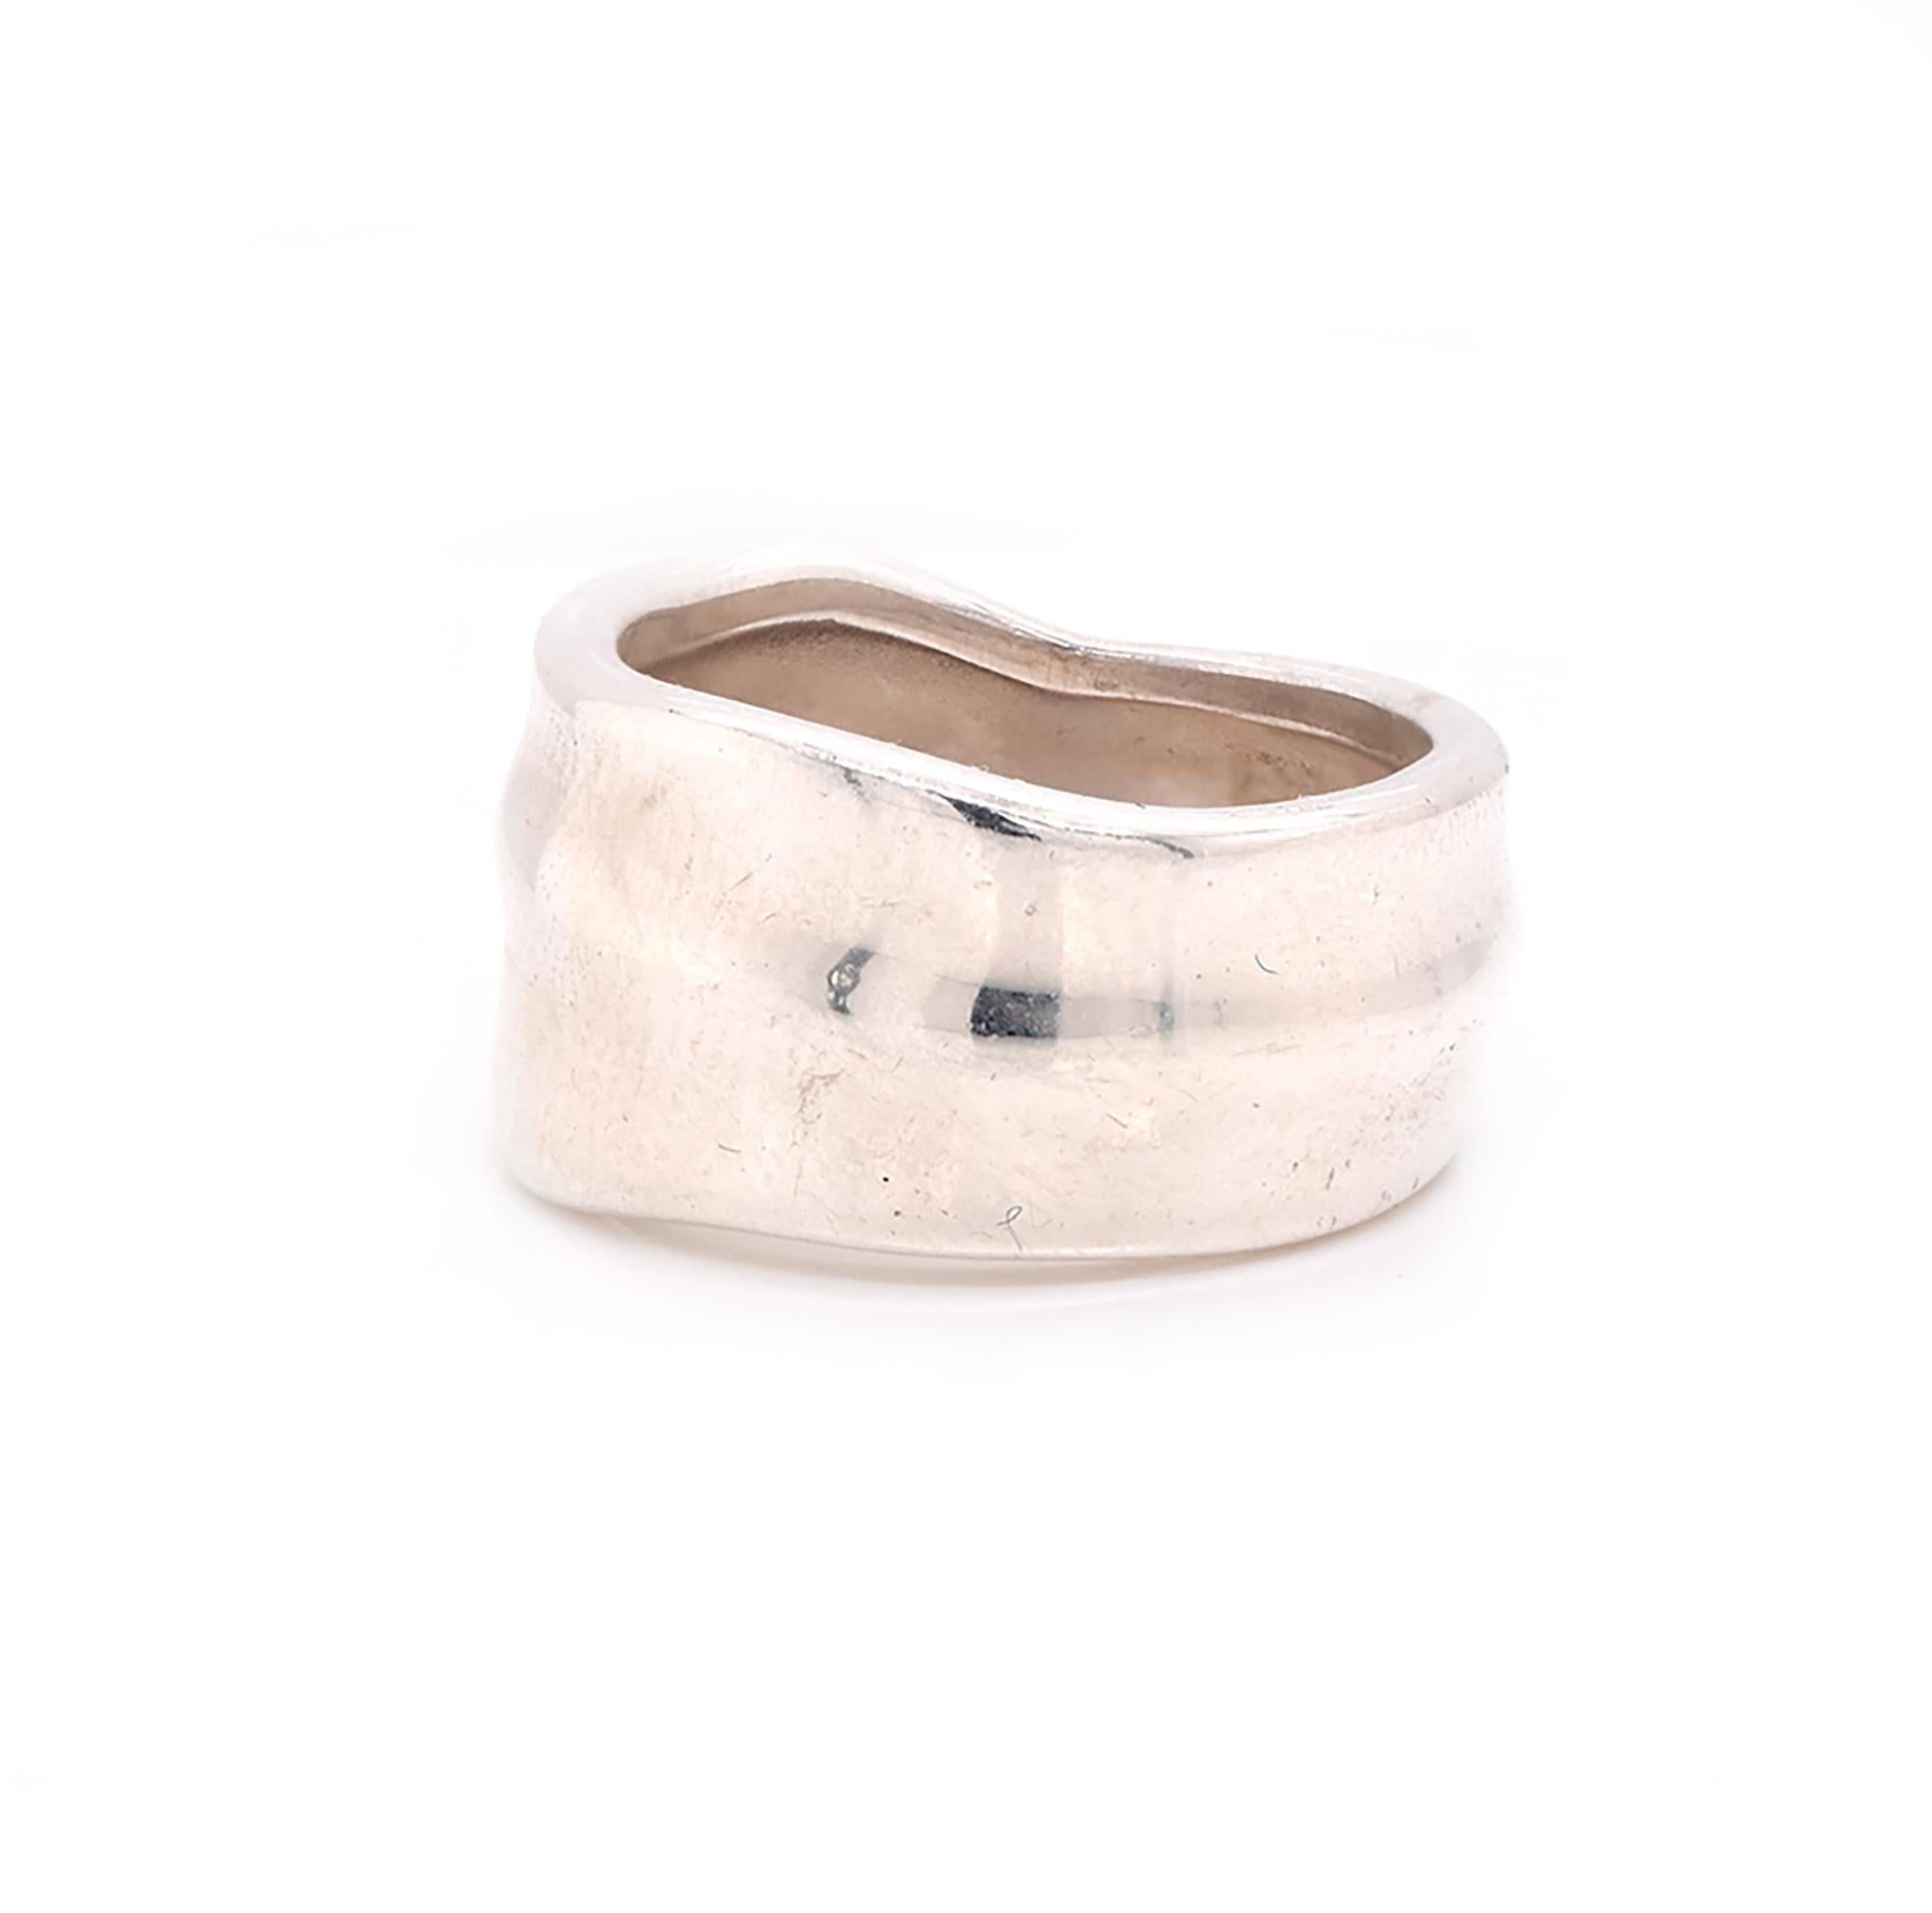 Designer: Tiffany & Co.
Material: Sterling silver 
Measurement: Band measures 10.7mm wide
Size: 4.5 (please allow two additional days for complimentary sizing) 
Weight: 6.84 grams